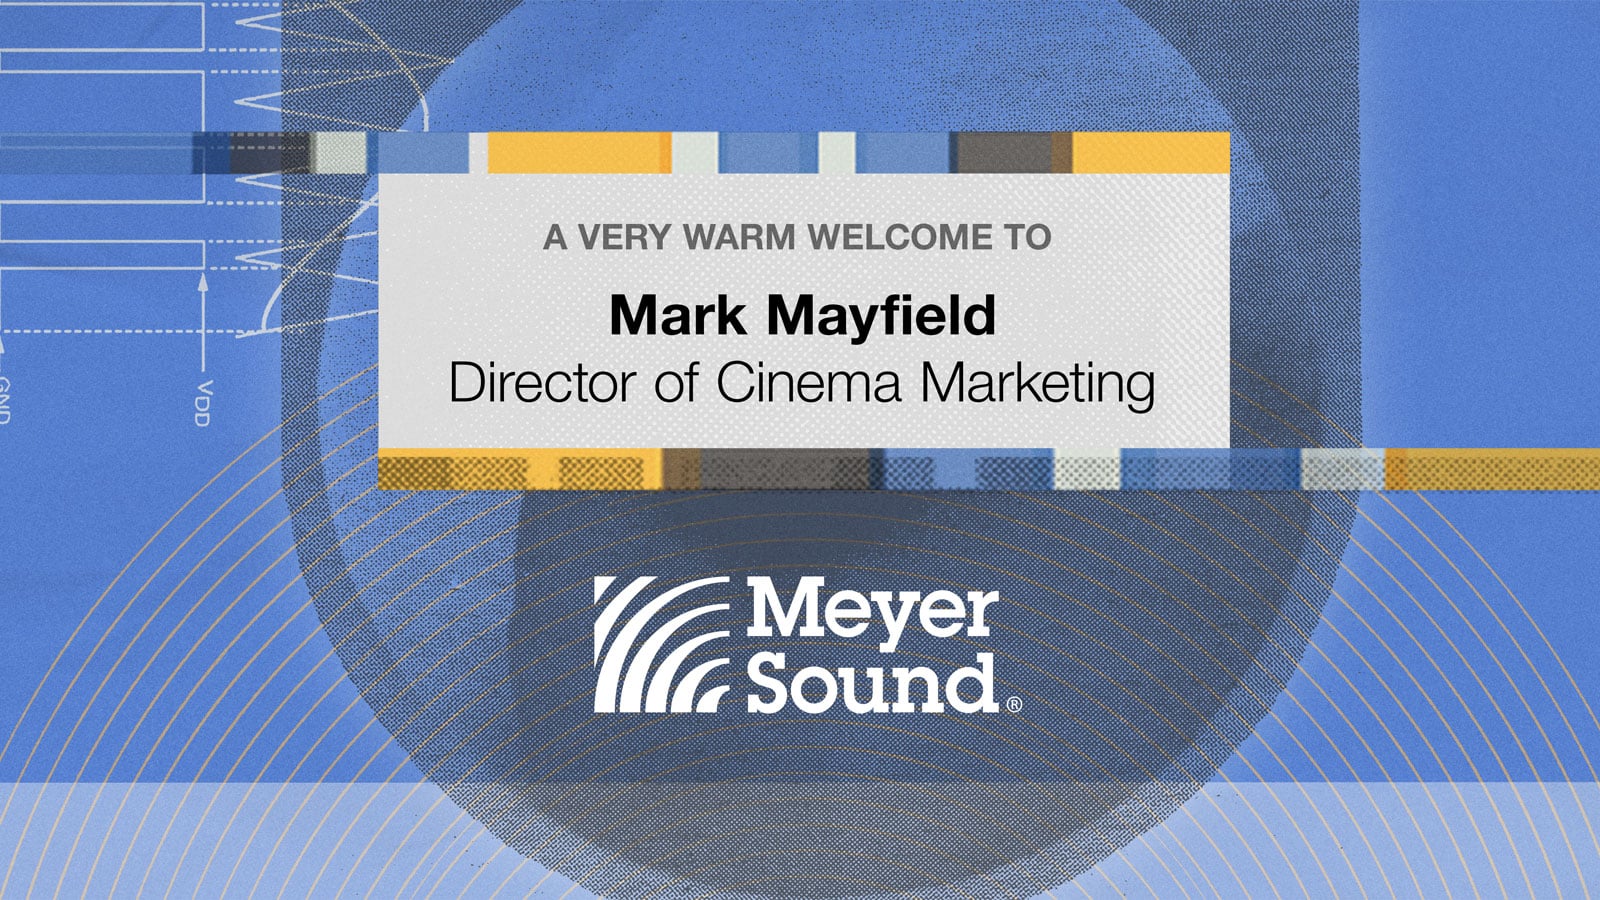 Meyer Sound Welcomes Mark Mayfield as Director of Cinema Marketing